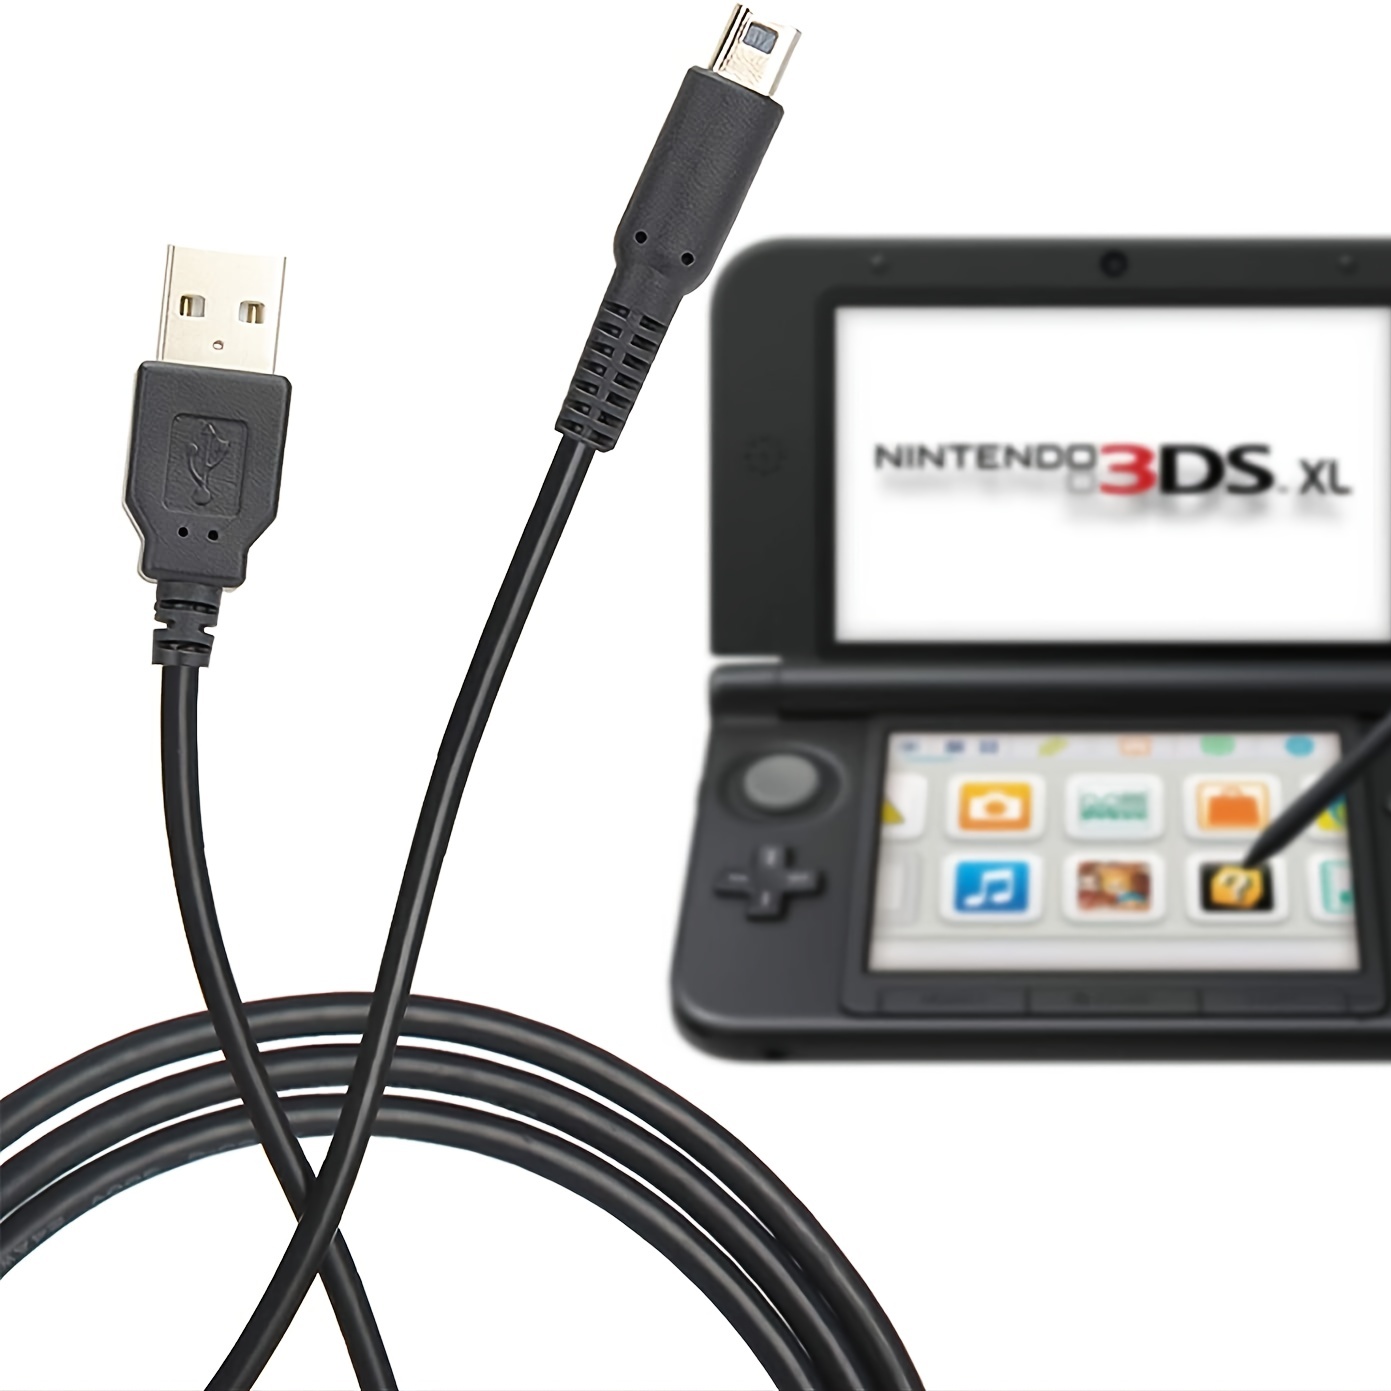 Charger for Nintendo DSi XL 3DS System New in Grey